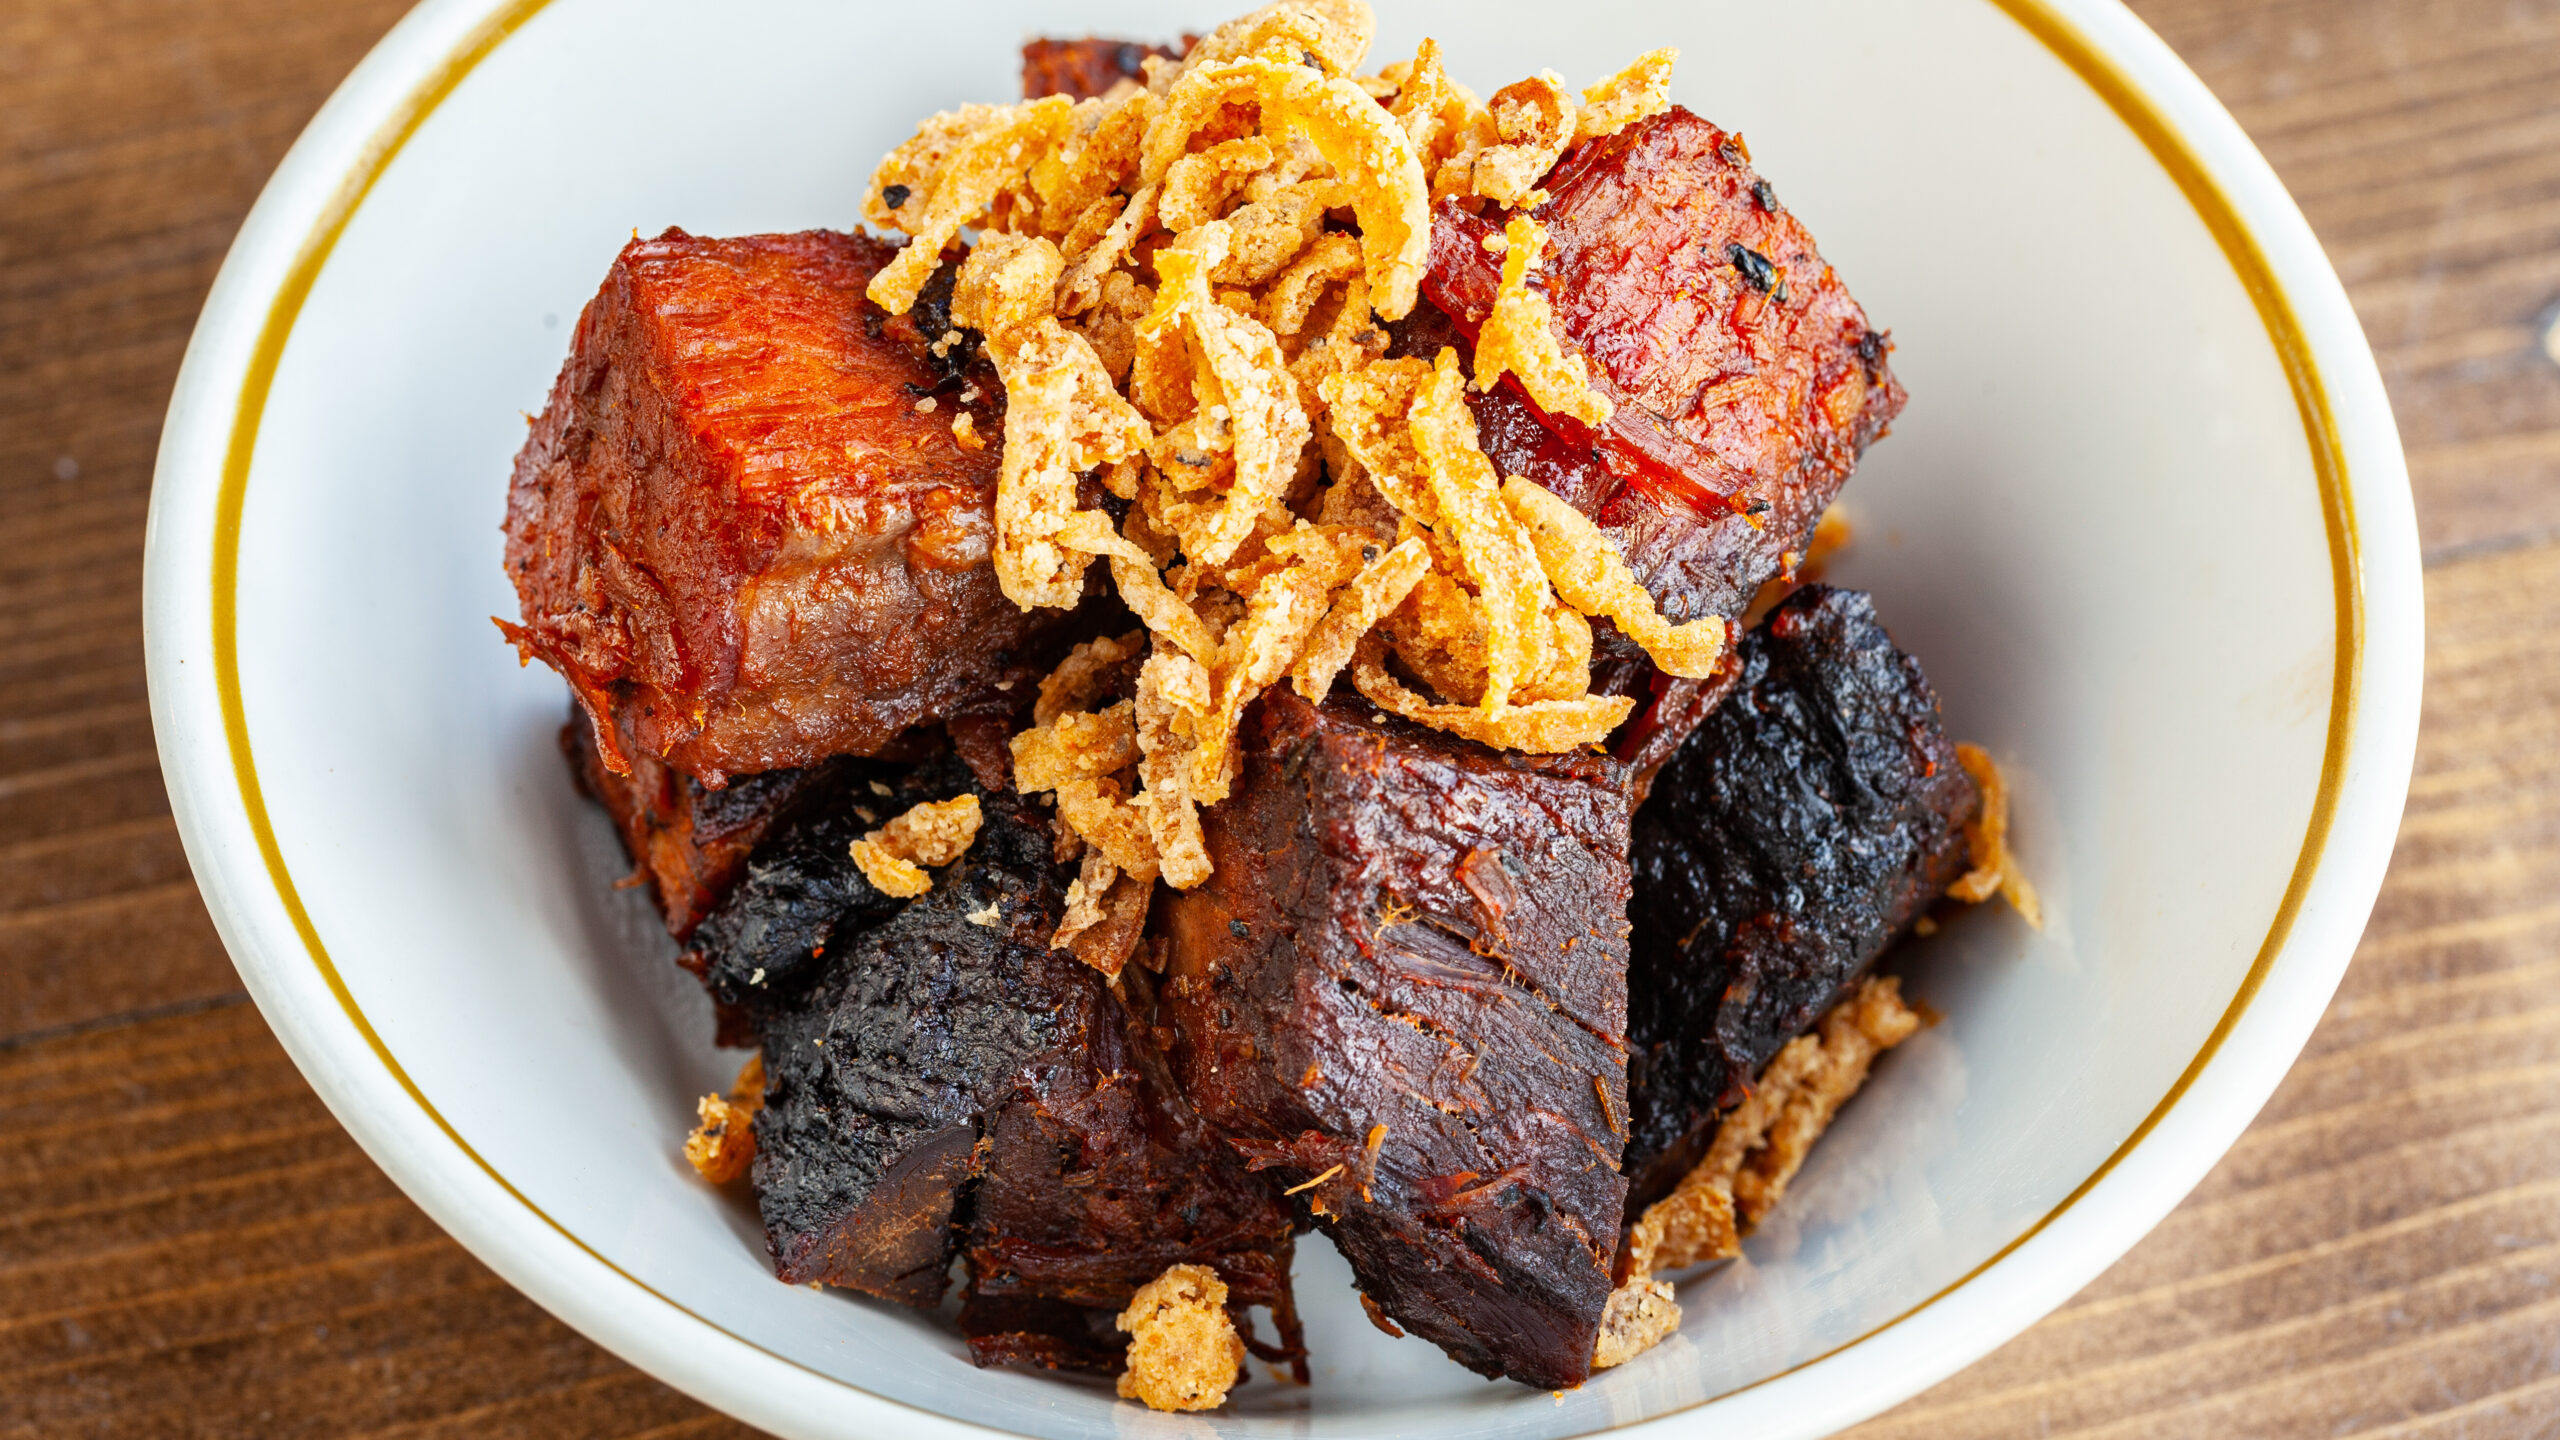 Prairie Dog Brewing's signature smoked brisket burnt ends with a dusting of fried onions.